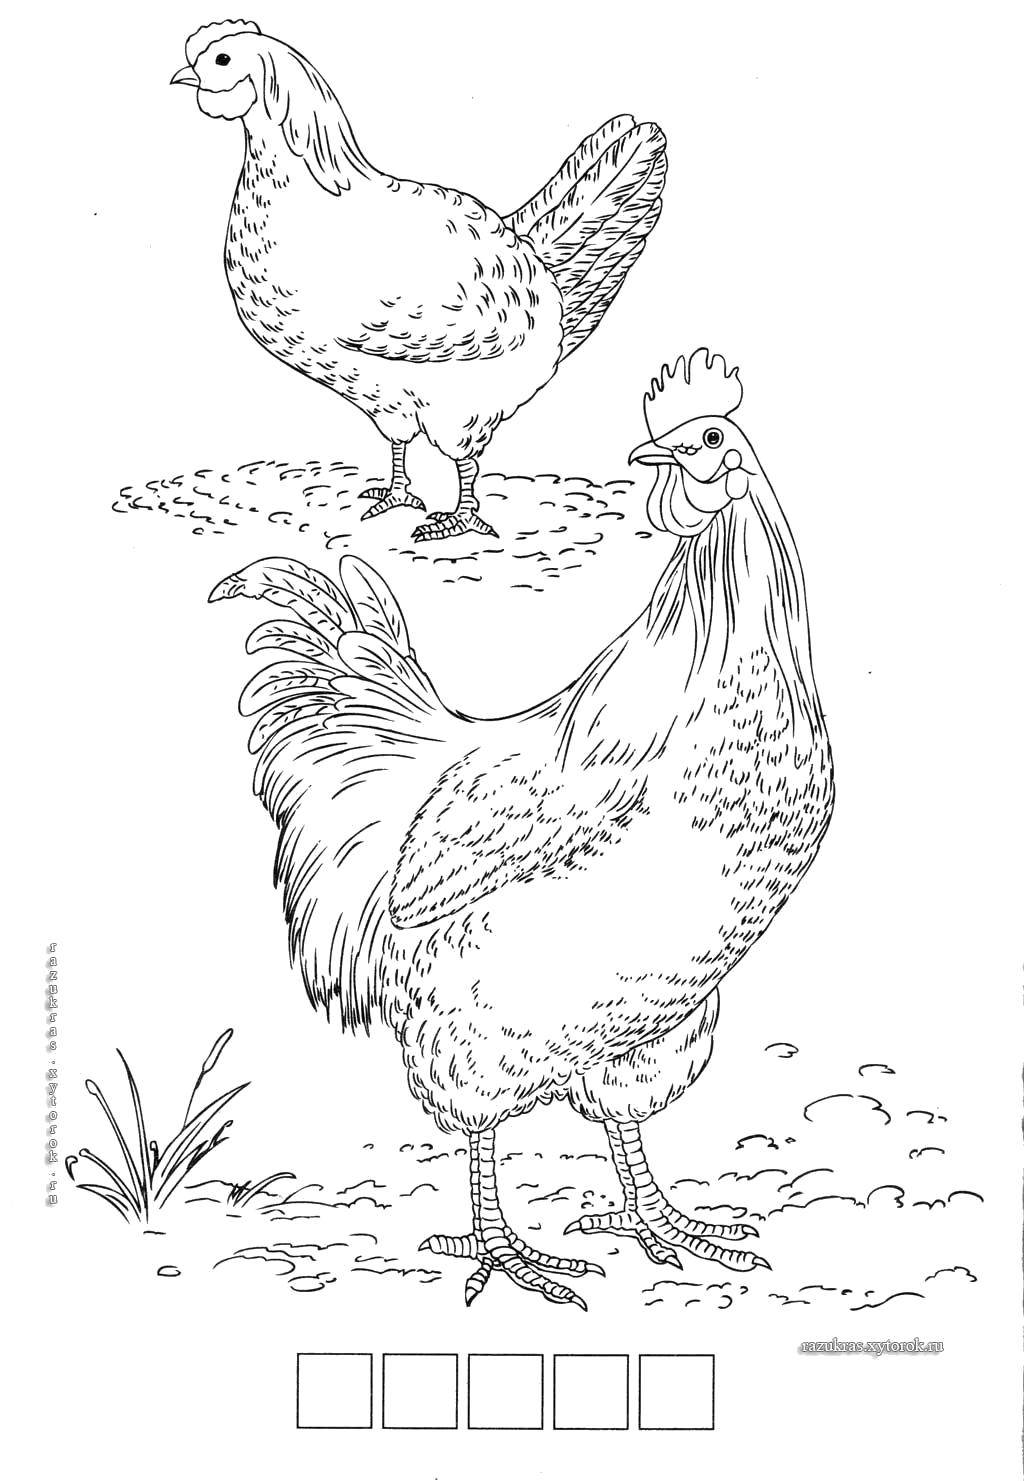 Coloring Hen and rooster. Category birds. Tags:  Birds, cock.